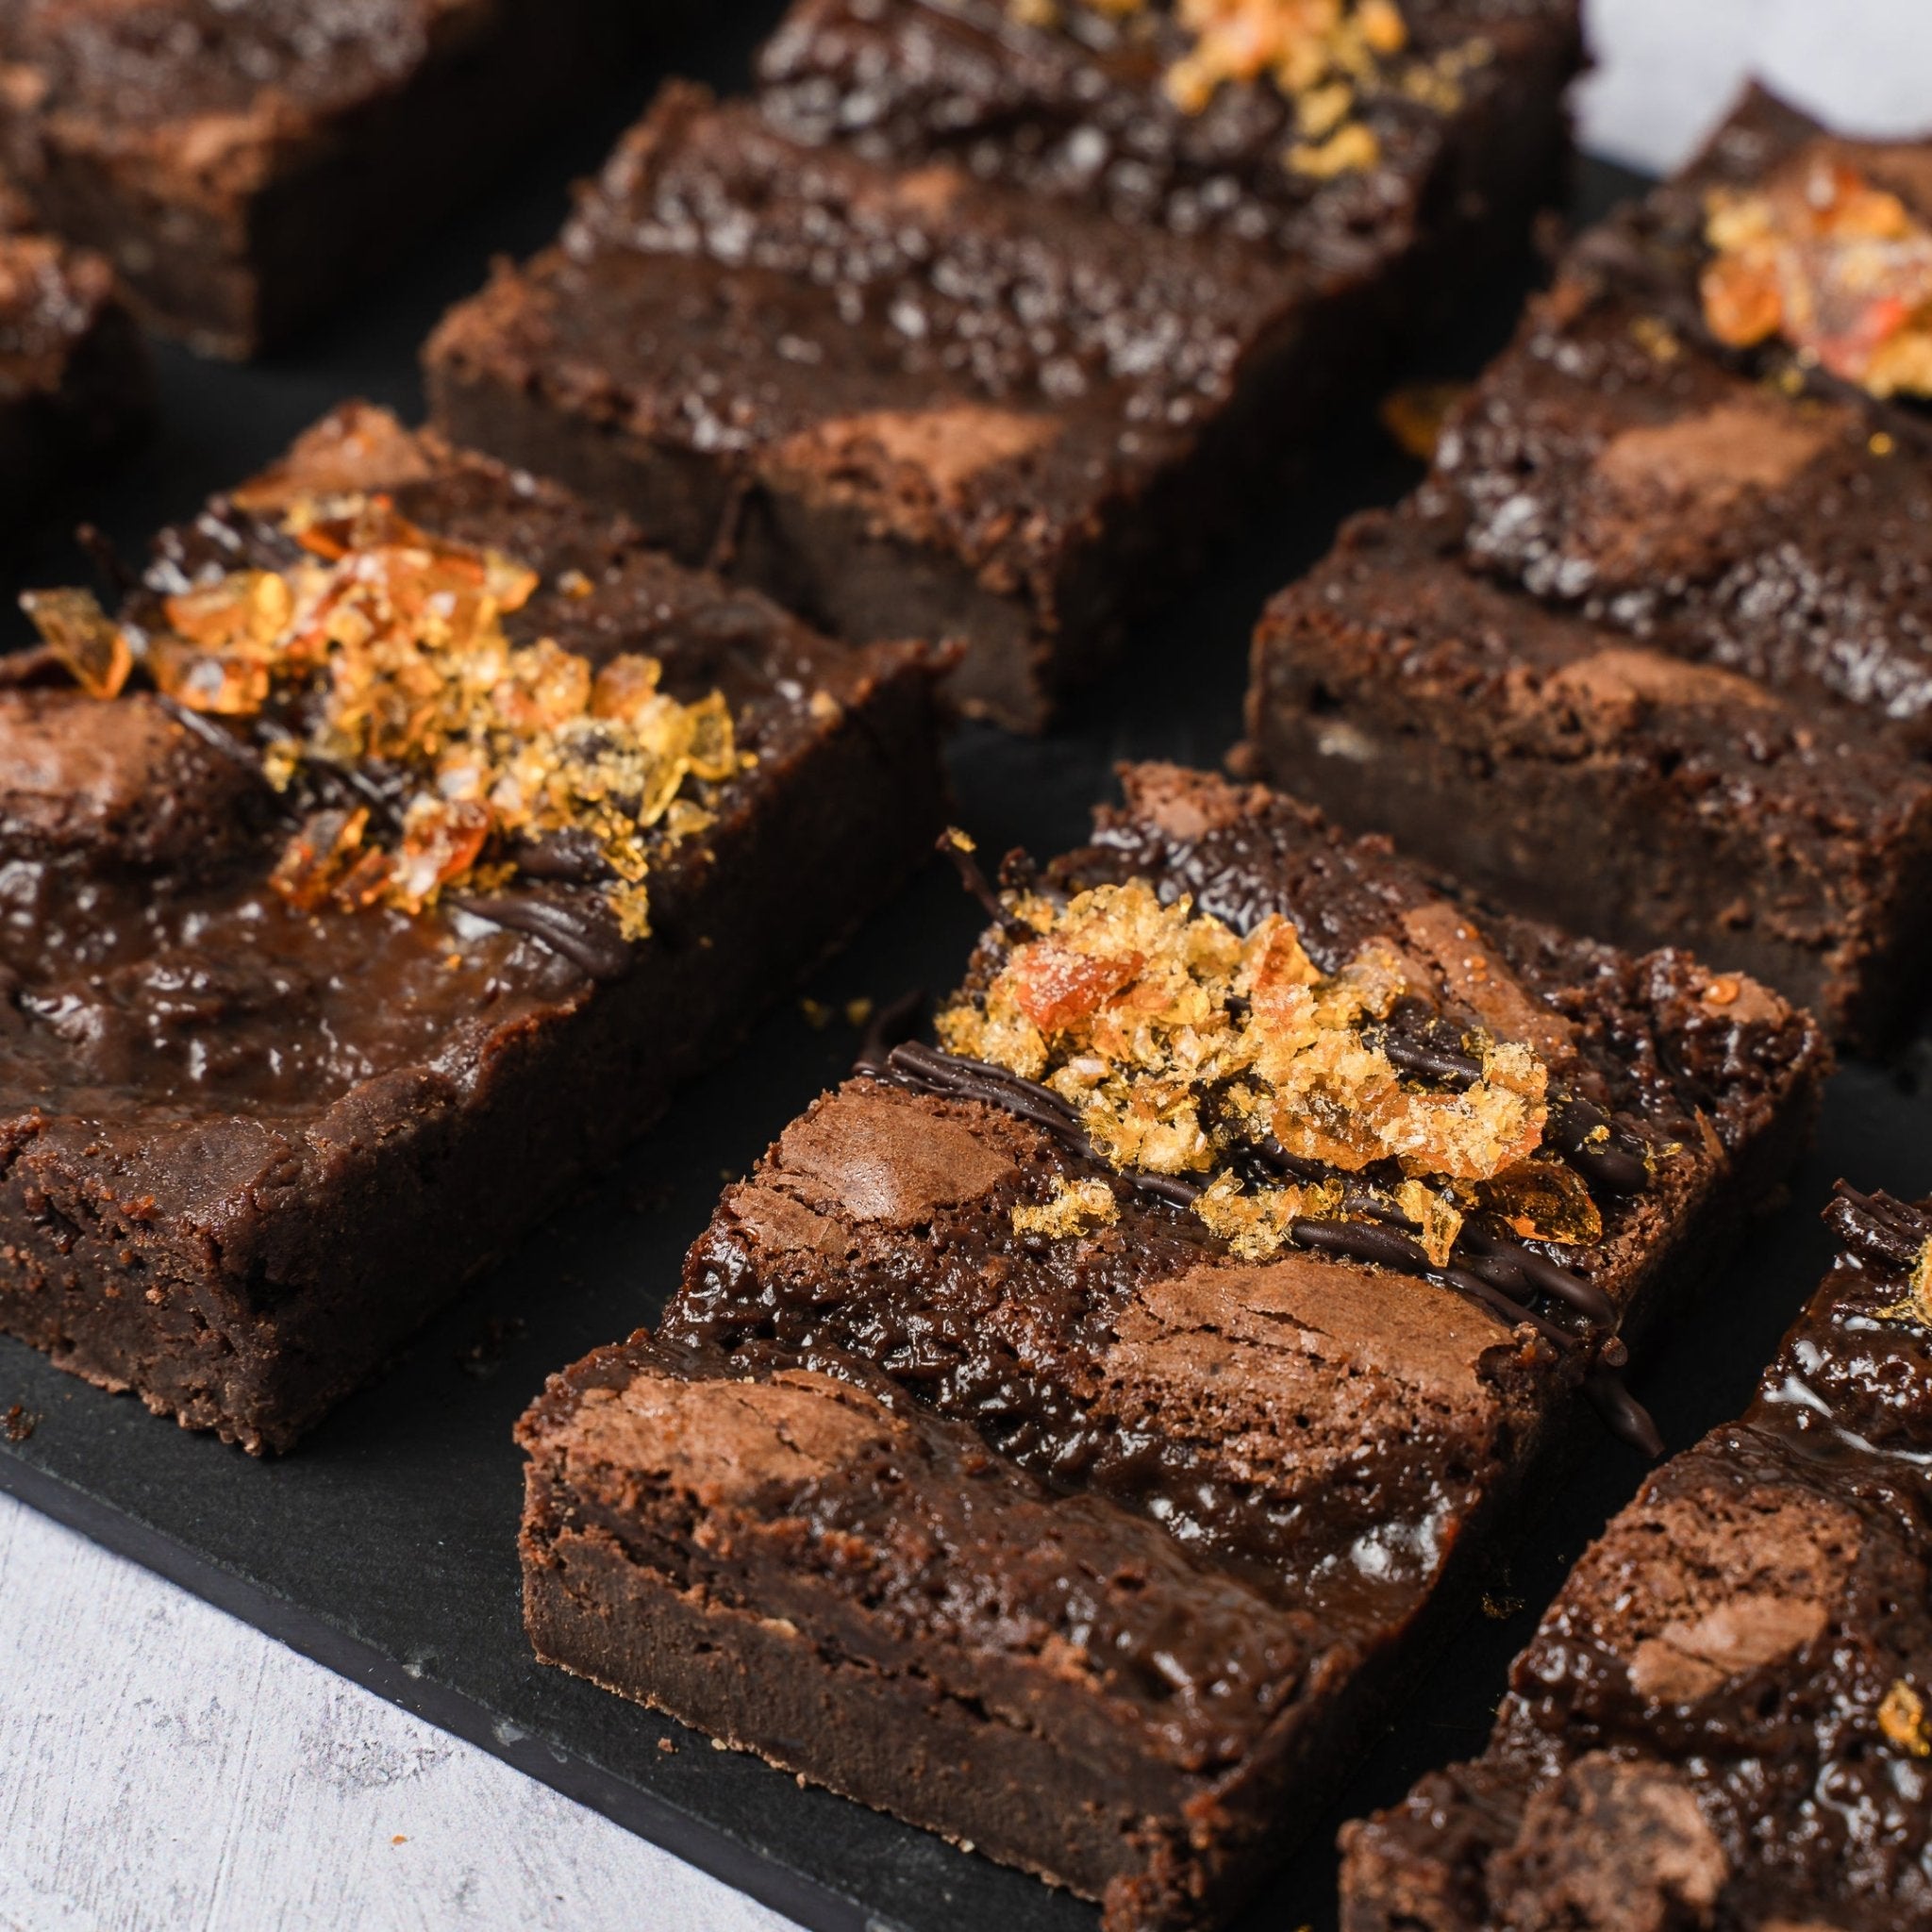 Free from Gluten Salted Caramel Brownie Box of 8 - Jack and Beyond